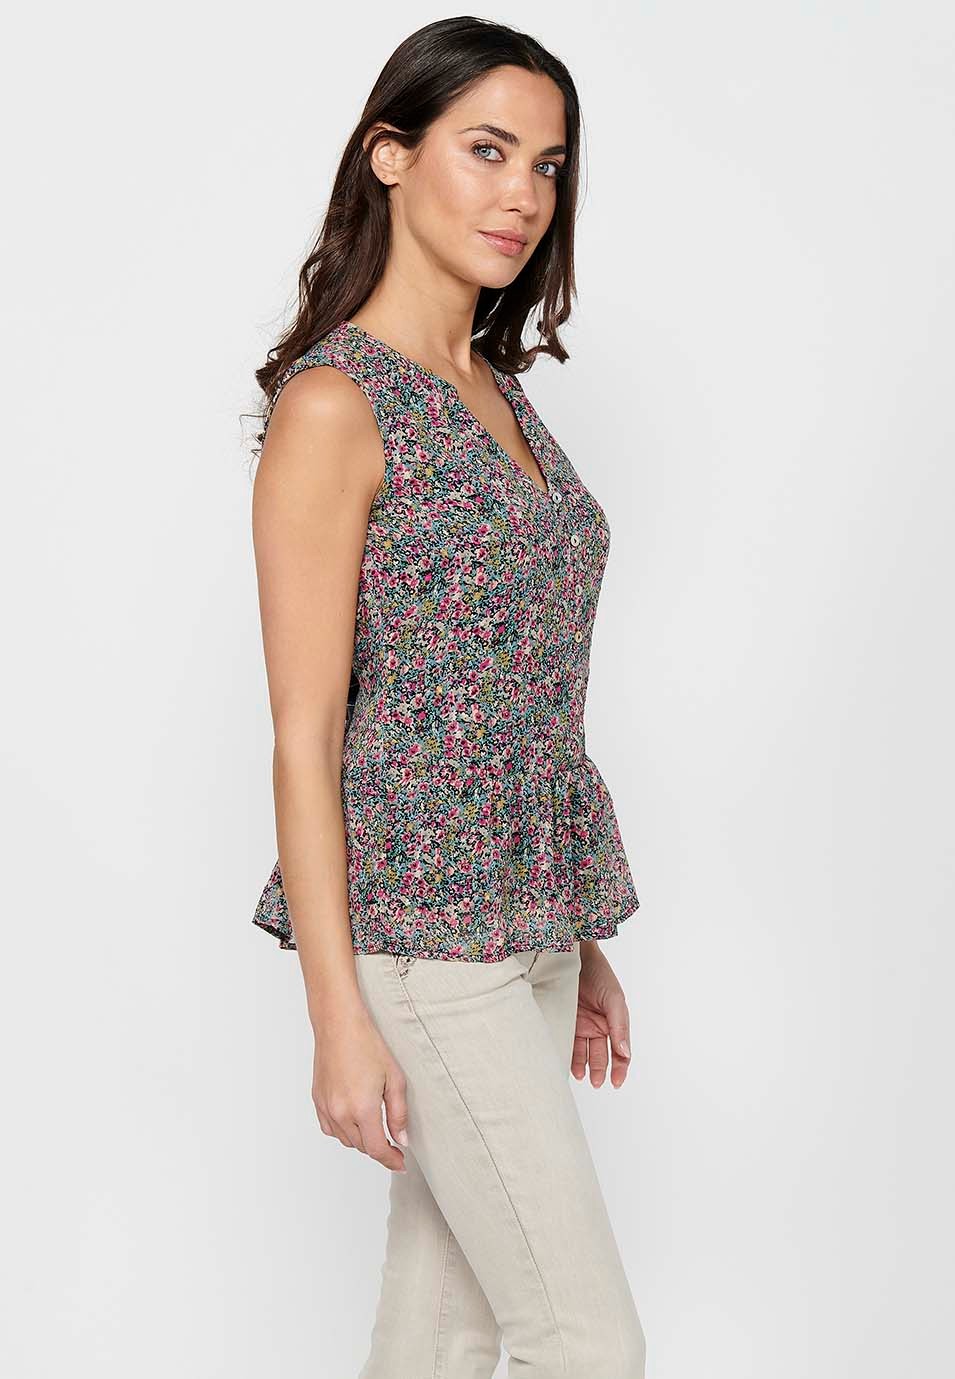 Sleeveless blouse with V-neck and floral print with ruffle finish and front button details in Multicolor for Women 3